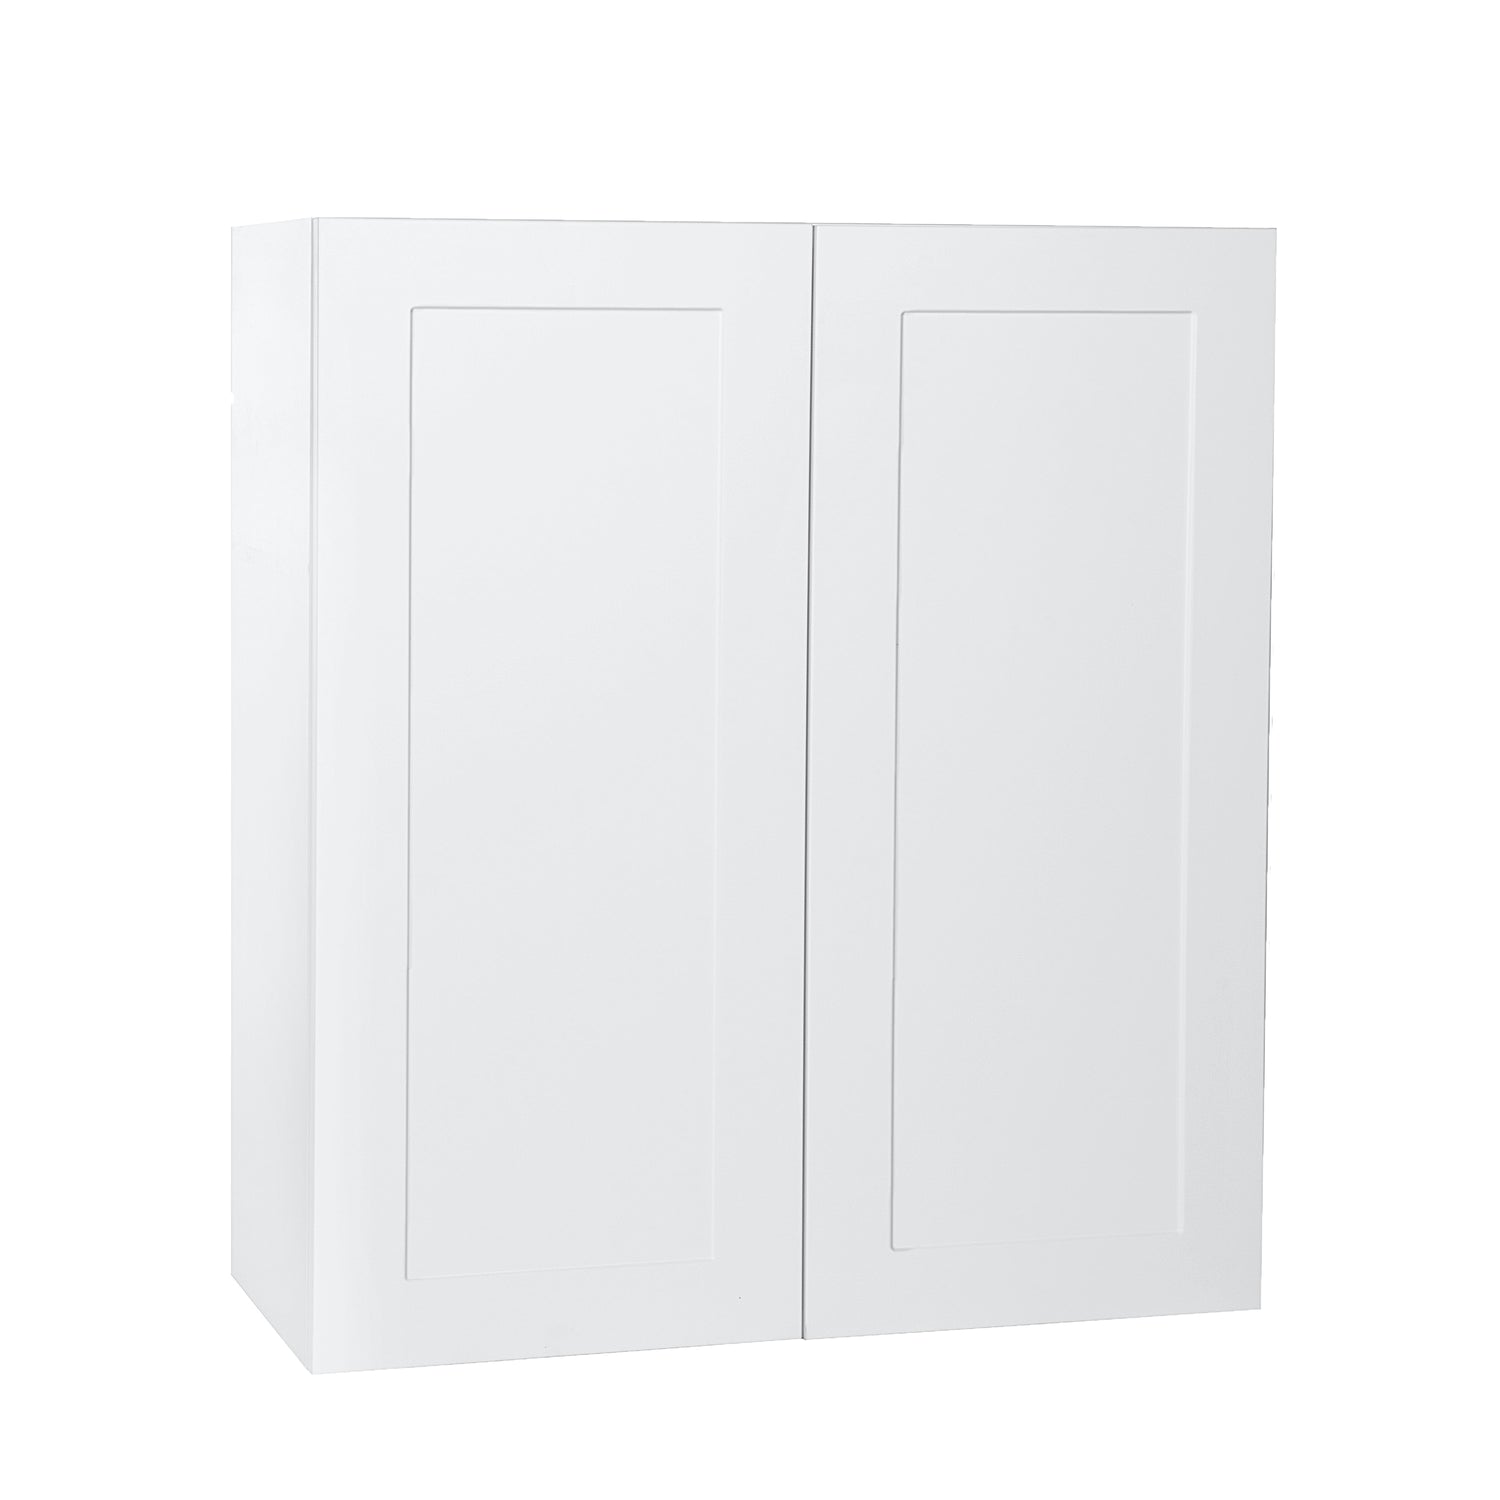 Quick Assemble Modern Style with Soft Close, White Shaker Wall Kitchen Cabinet, 2 Door (30 in W x 12 D x 30 in H) -  Pro-Edge HD